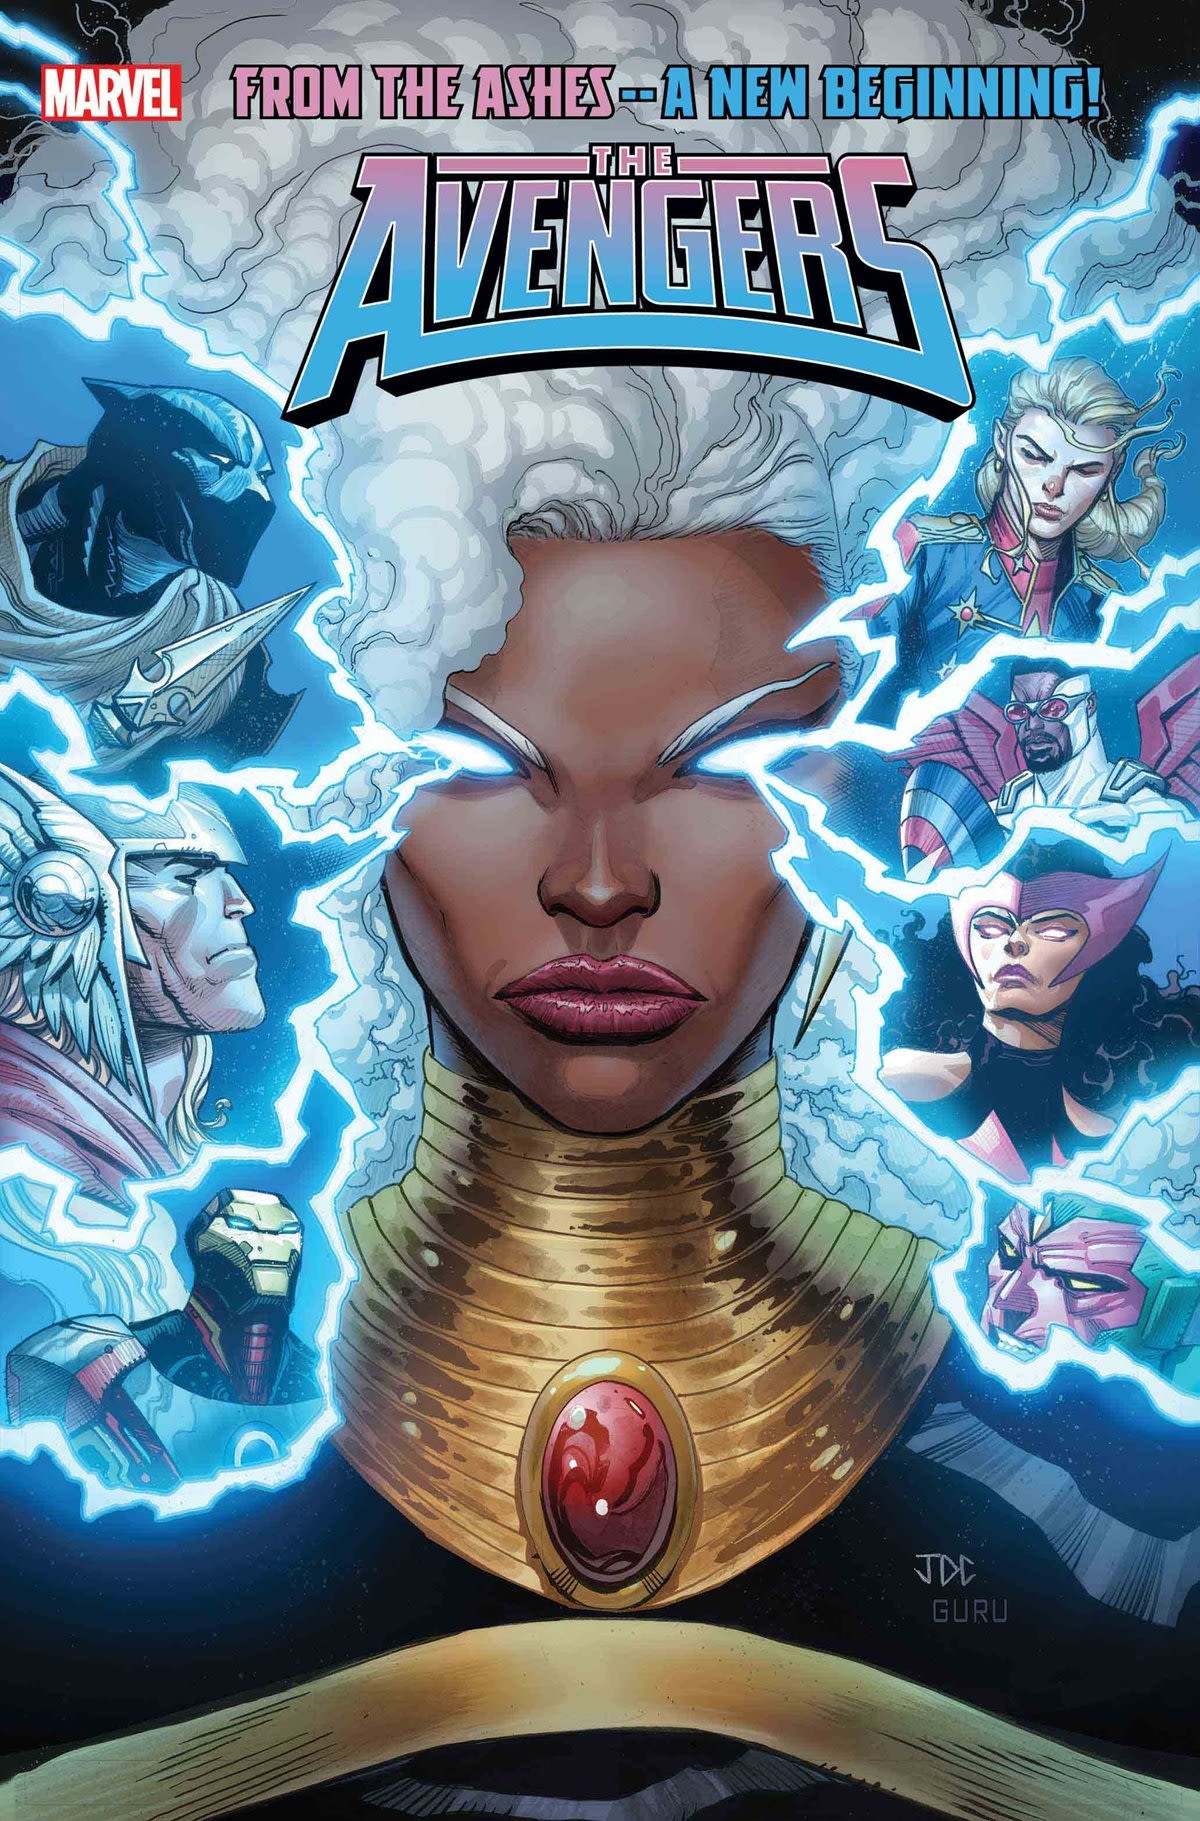 Marvel Comics Reveals Storm of the X-MEN Will Become an Avenger, Get New Solo Series